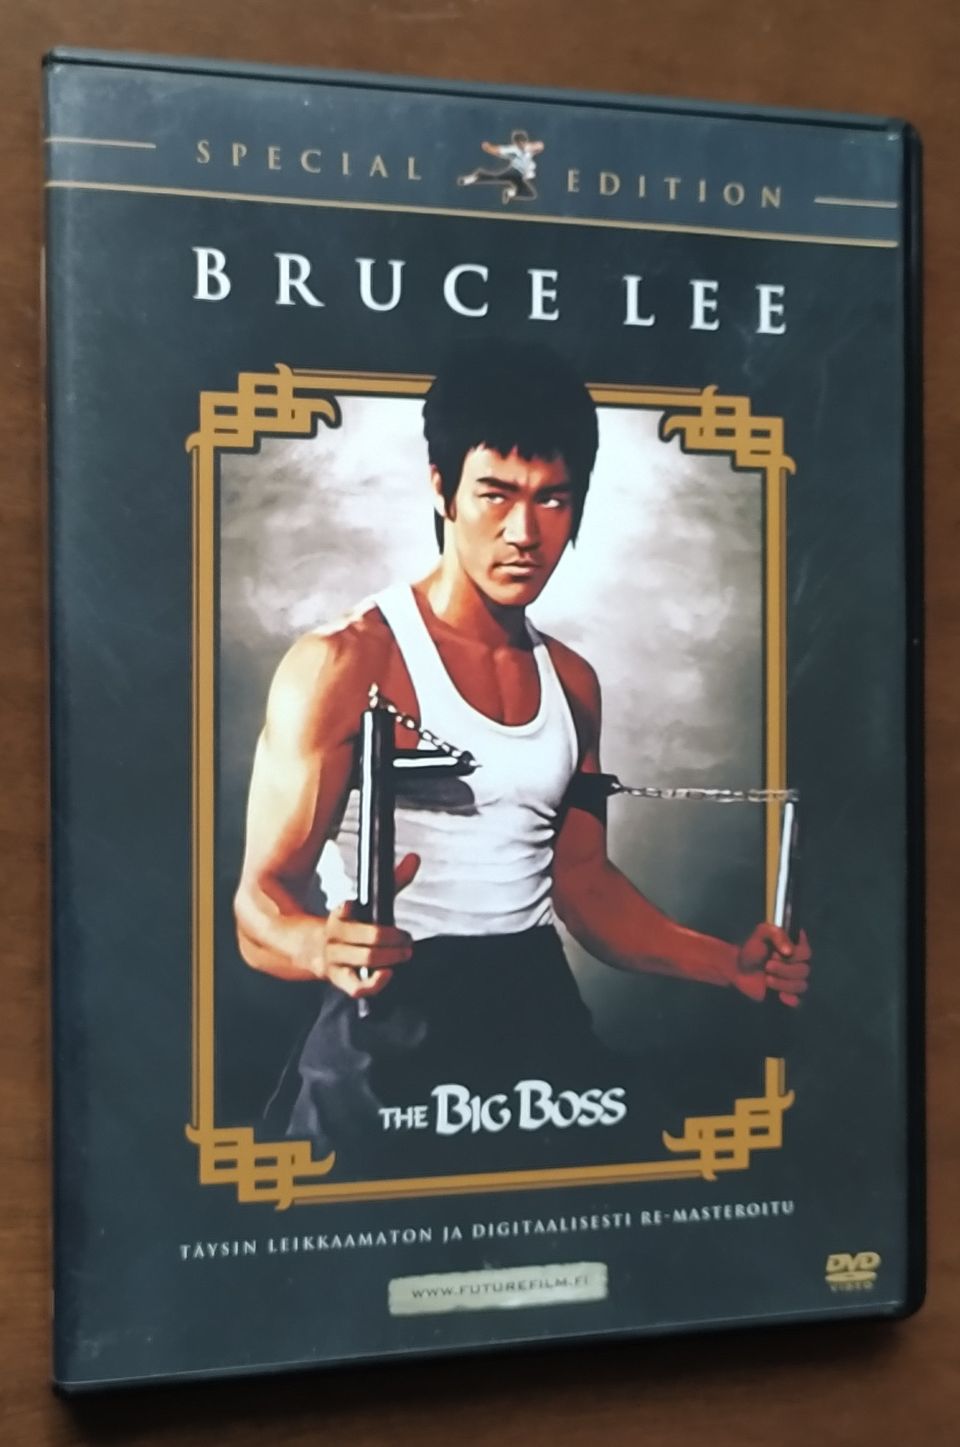 Bruce Lee Special Edition DVD